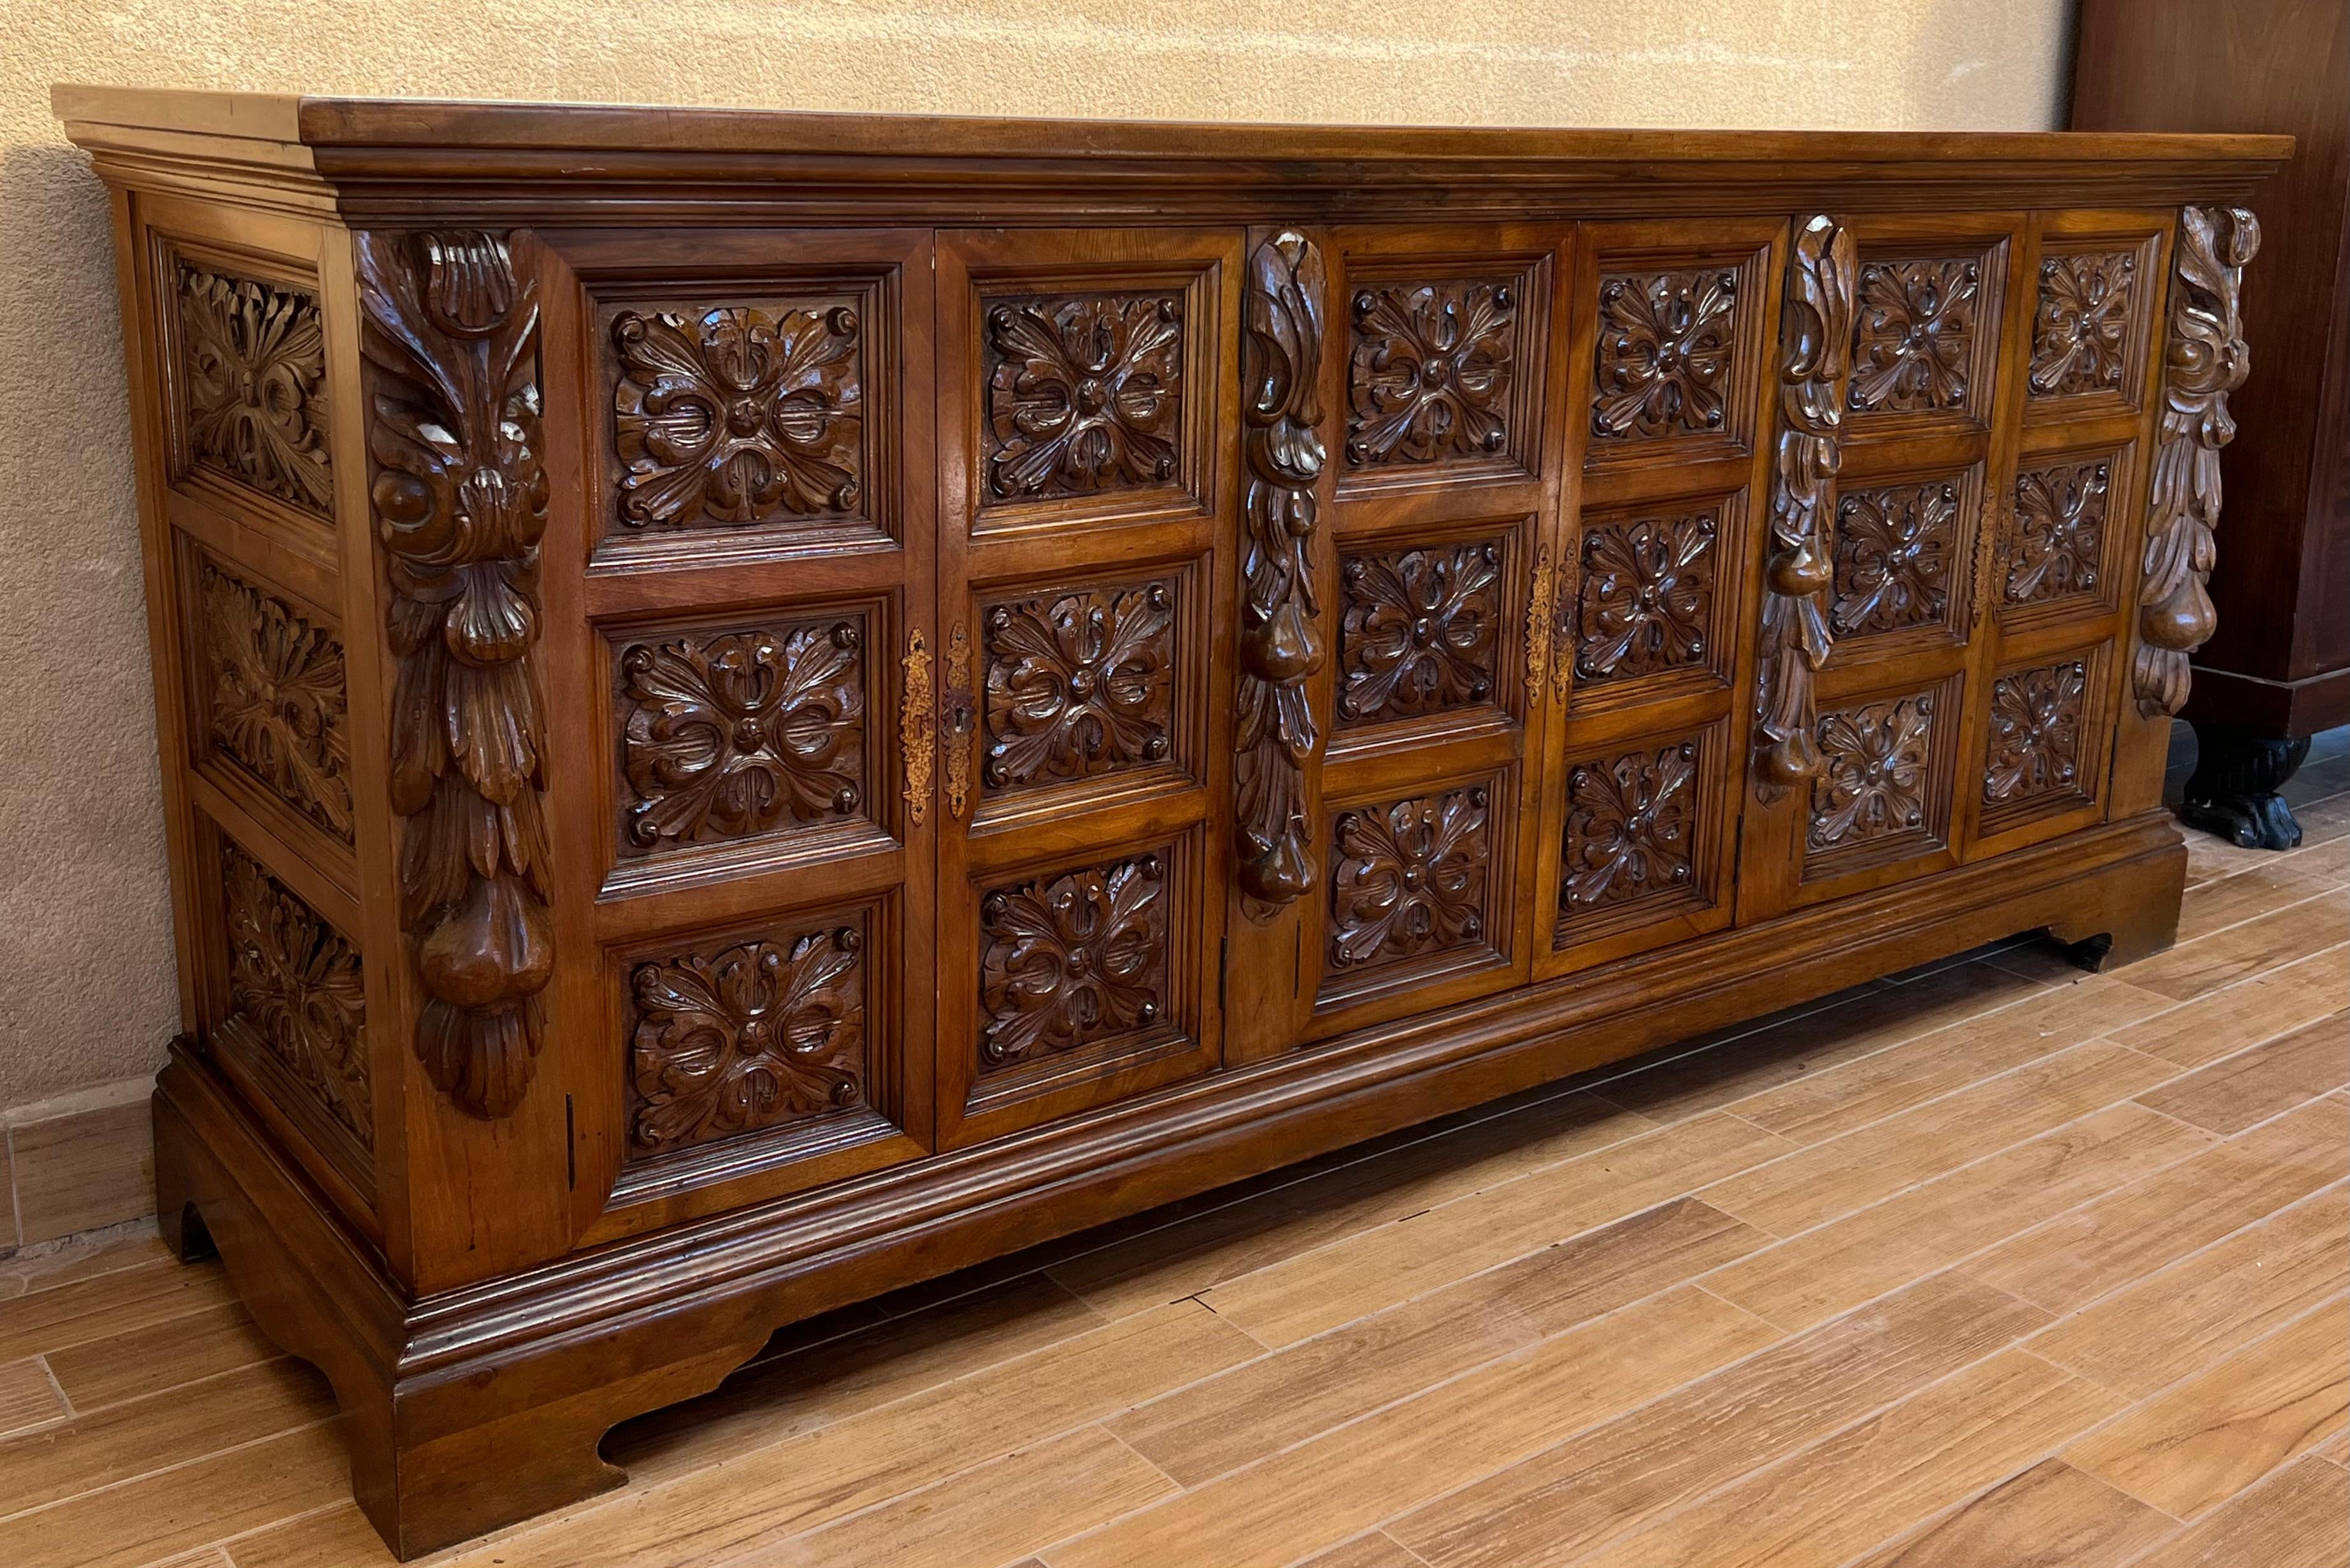 Antique Spanish Carved Walnut Sideboard with Florals Reliefs, circa 1870-1880 In Good Condition For Sale In Miami, FL